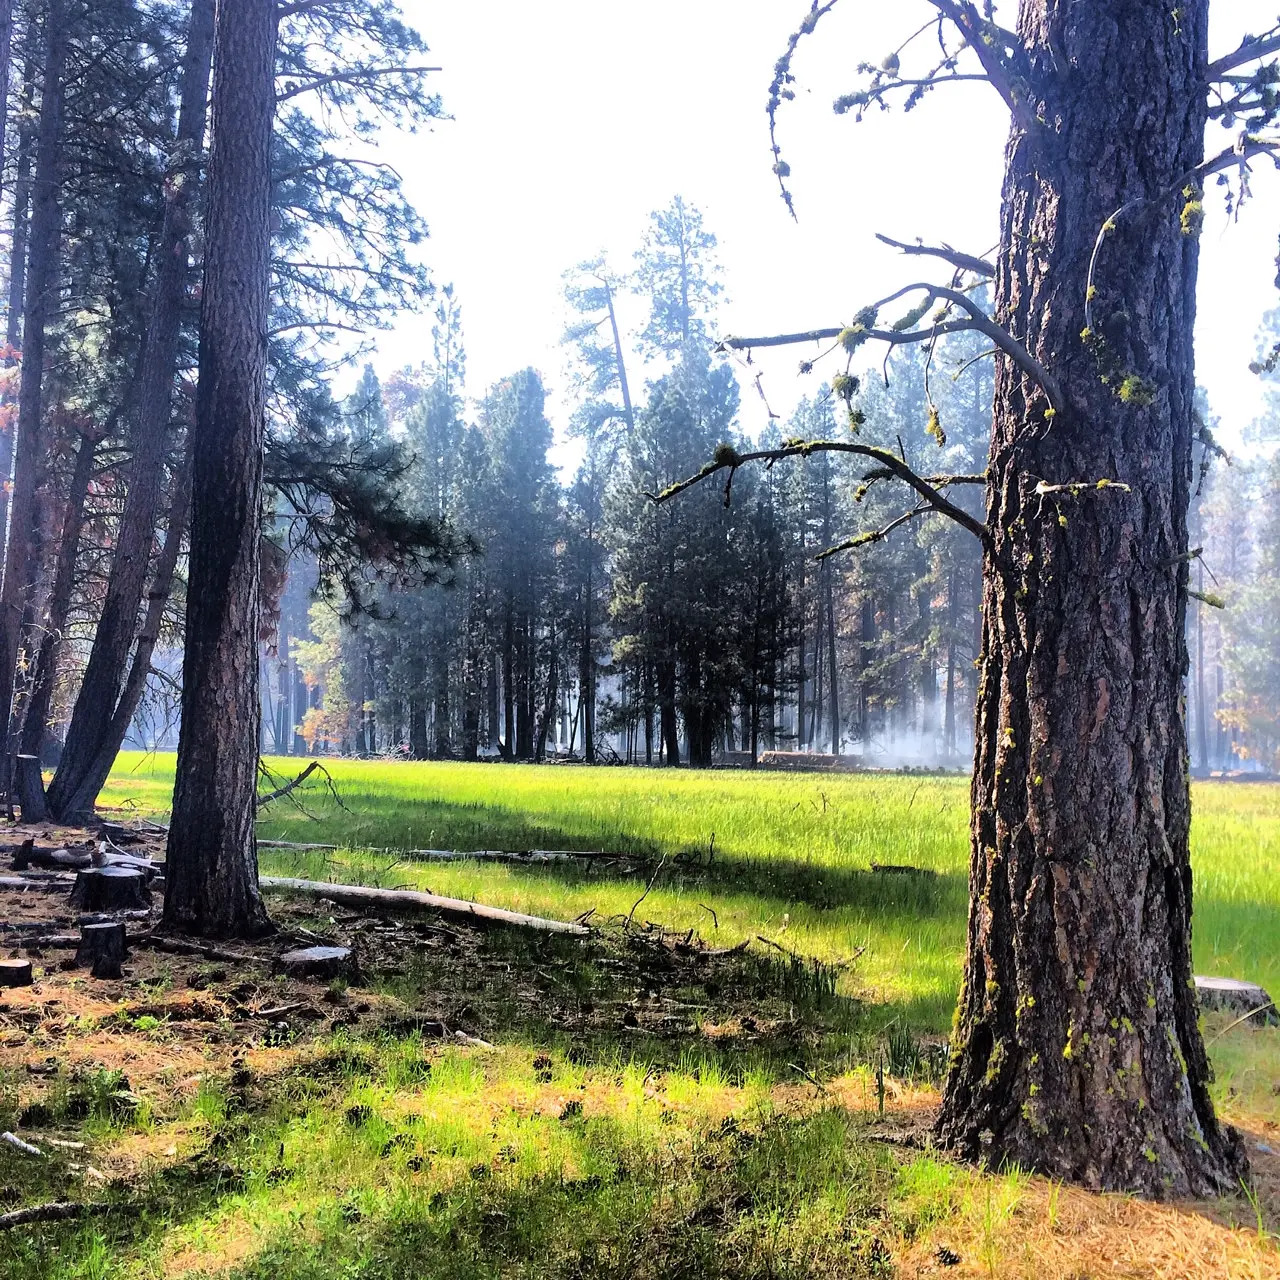 A burned forest can be a healthy one. A stand of ponderosa pine still smolders from a recent prescribed fire in central Oregon. The US Forest Service sets fires now to mimic natural conditions.